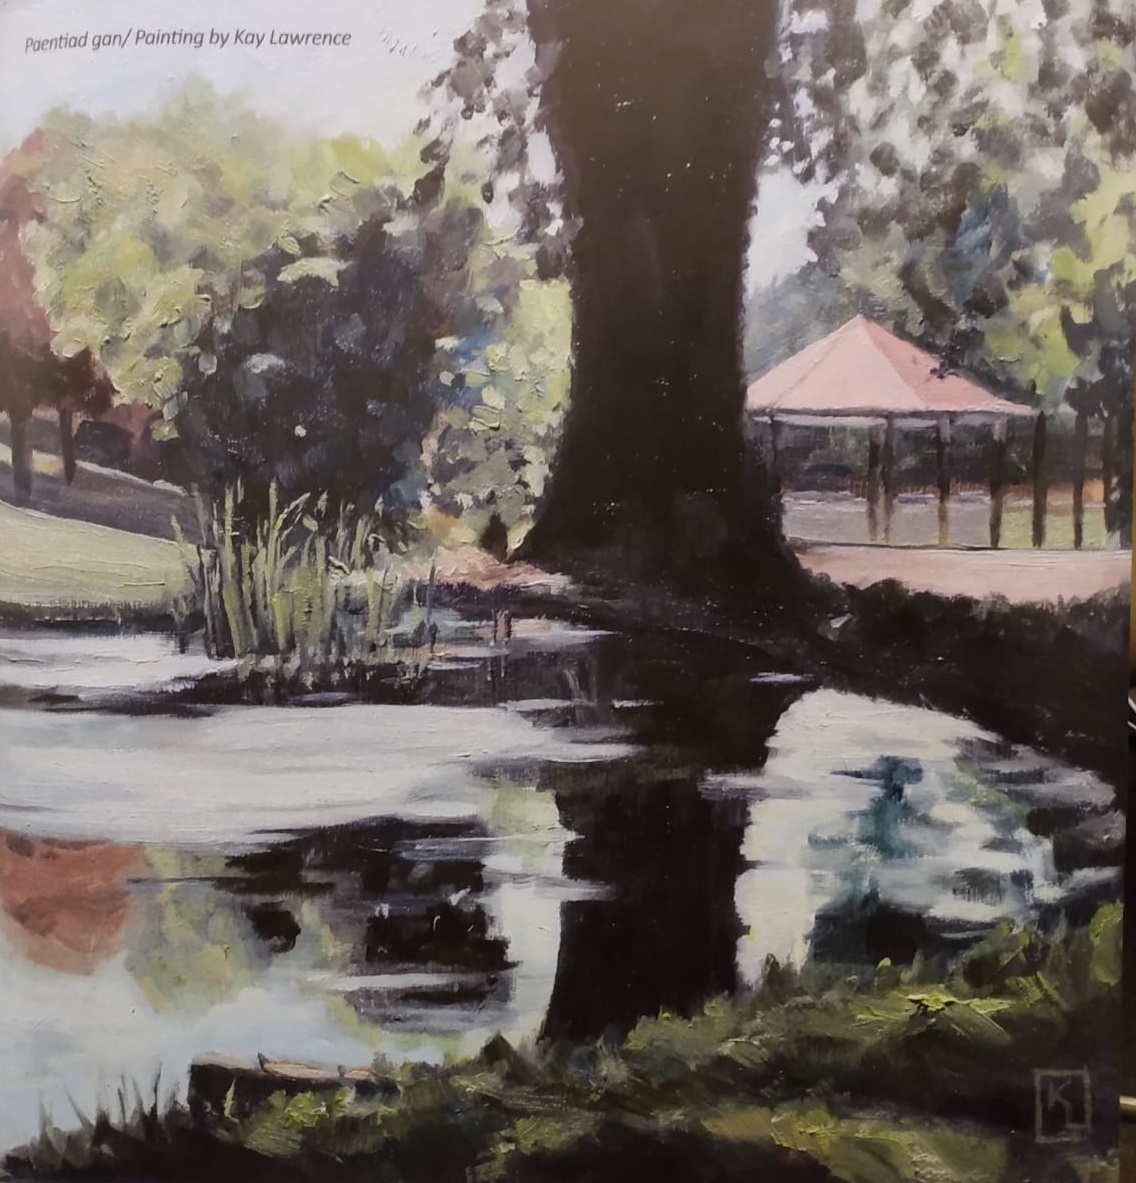 A painting of Pontypool Park by Kay Lawrence on one of artREGENs banners.